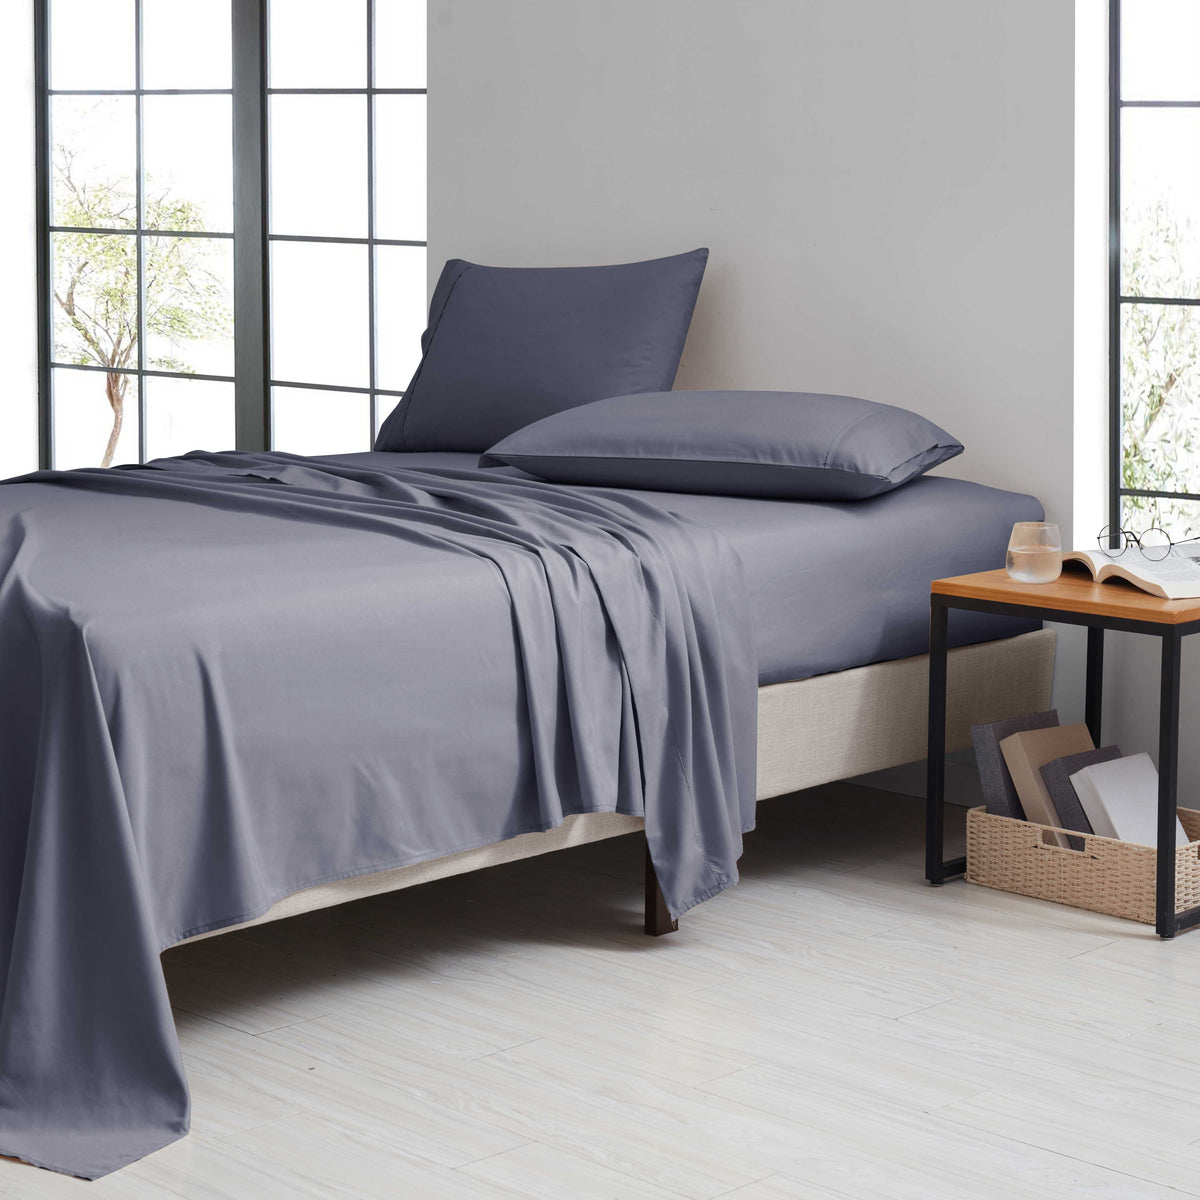 Bamboo 1800 Thread Count 4 Piece Luxury Solid Sheet Set.